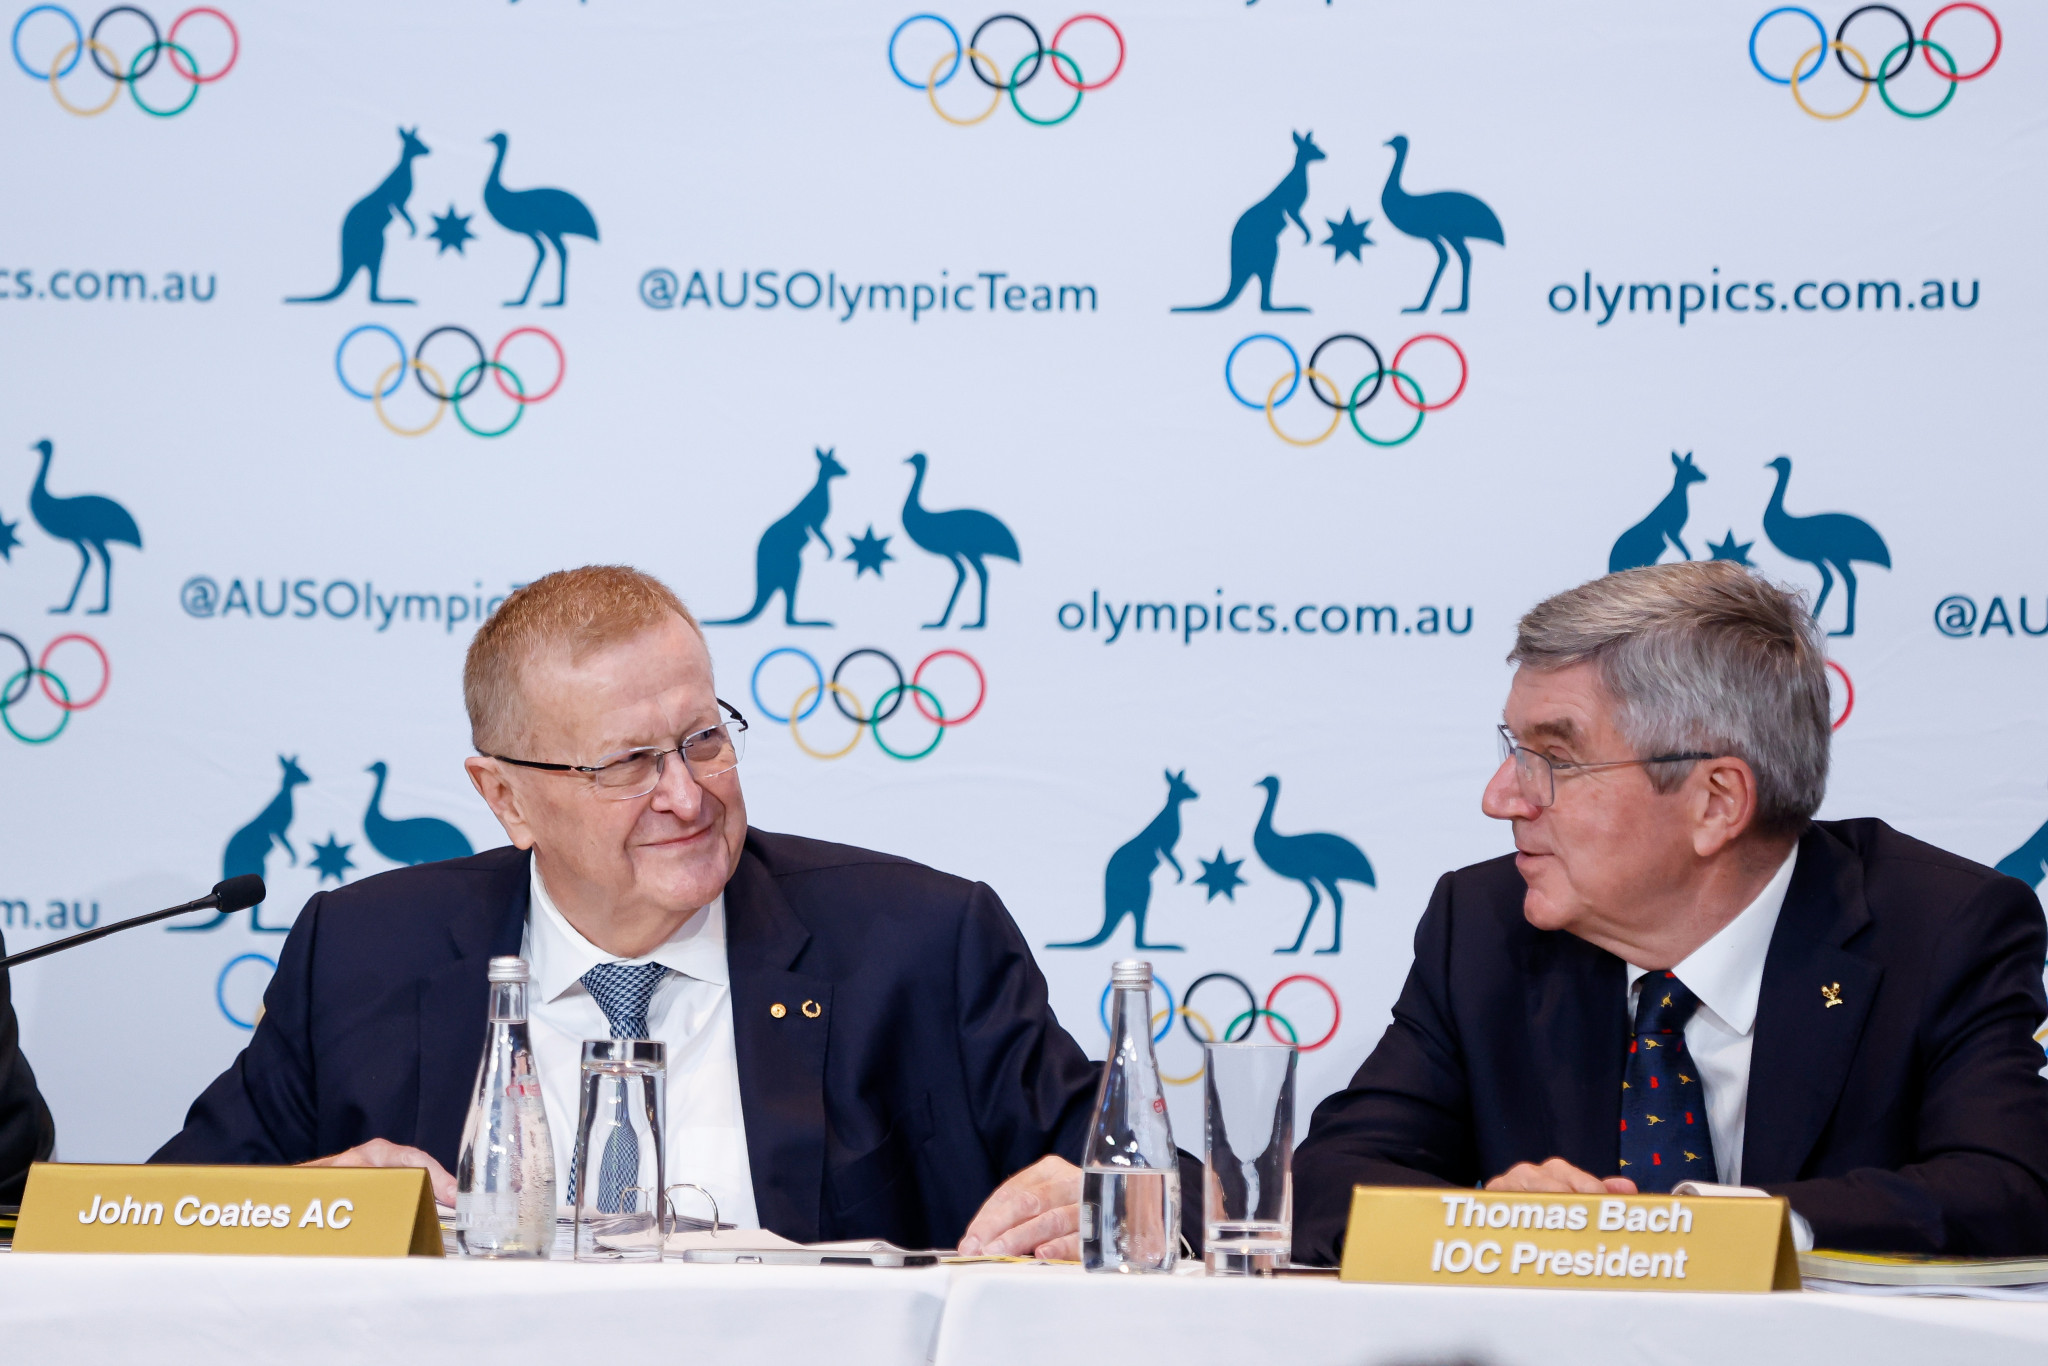 John Coates, left, and Thomas Bach delivered speeches at the AOC Annual General Meeting ©Getty Images